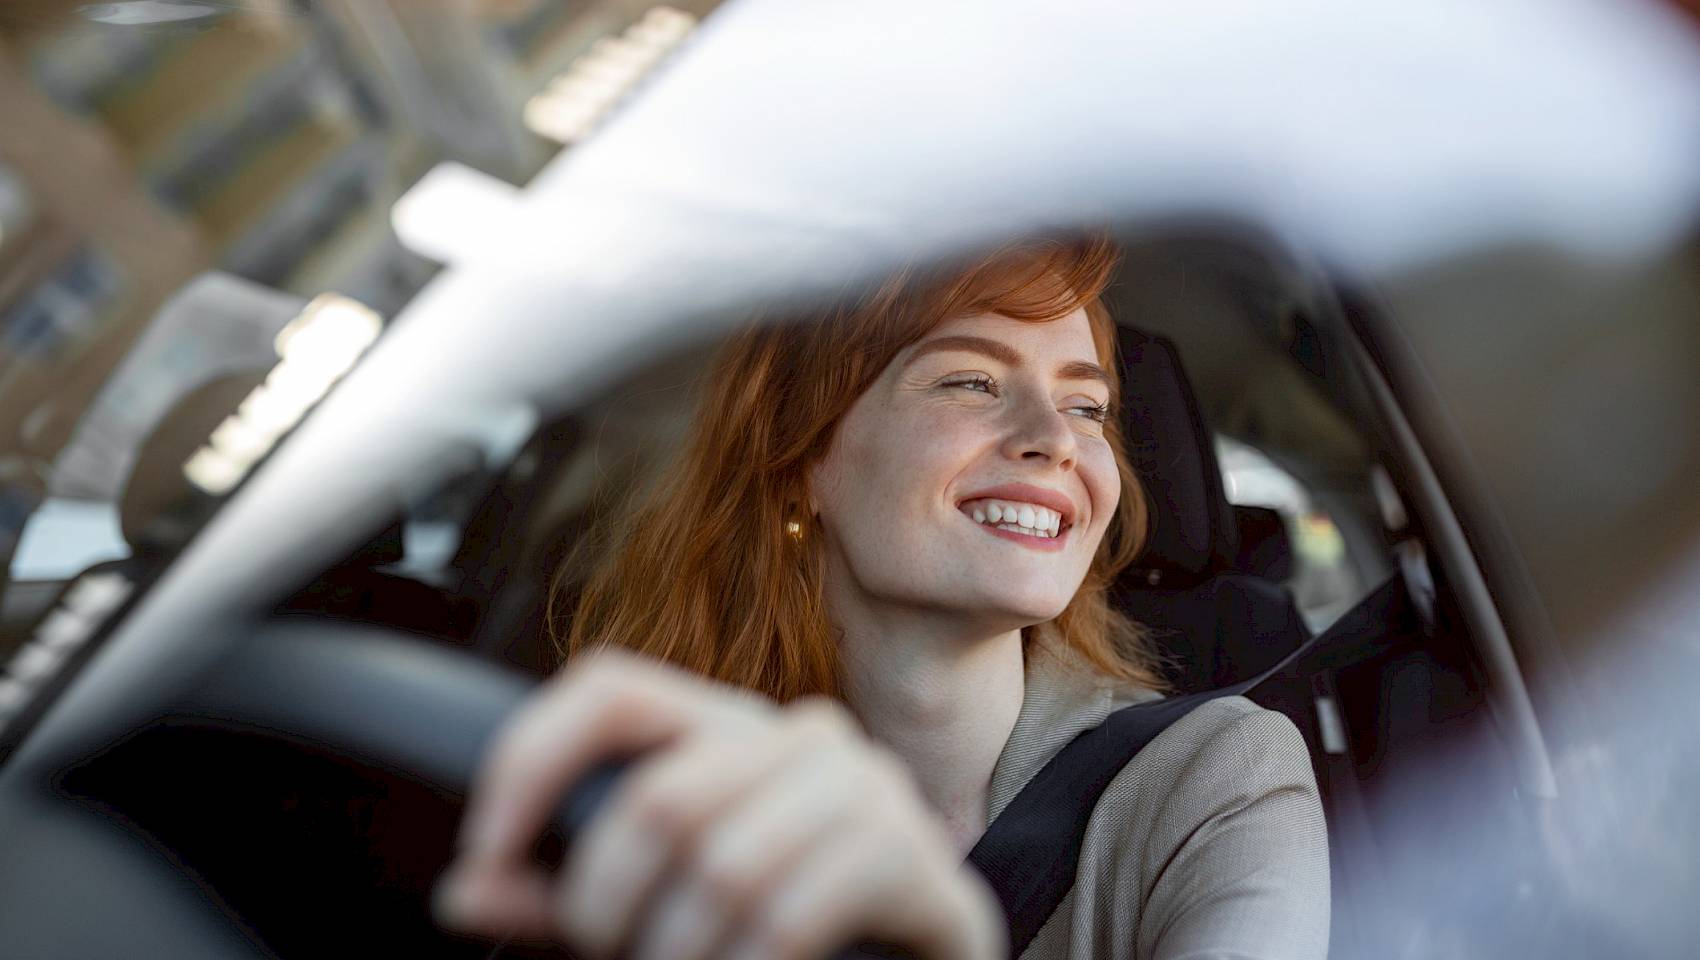 Red headed female smiling and driving a car